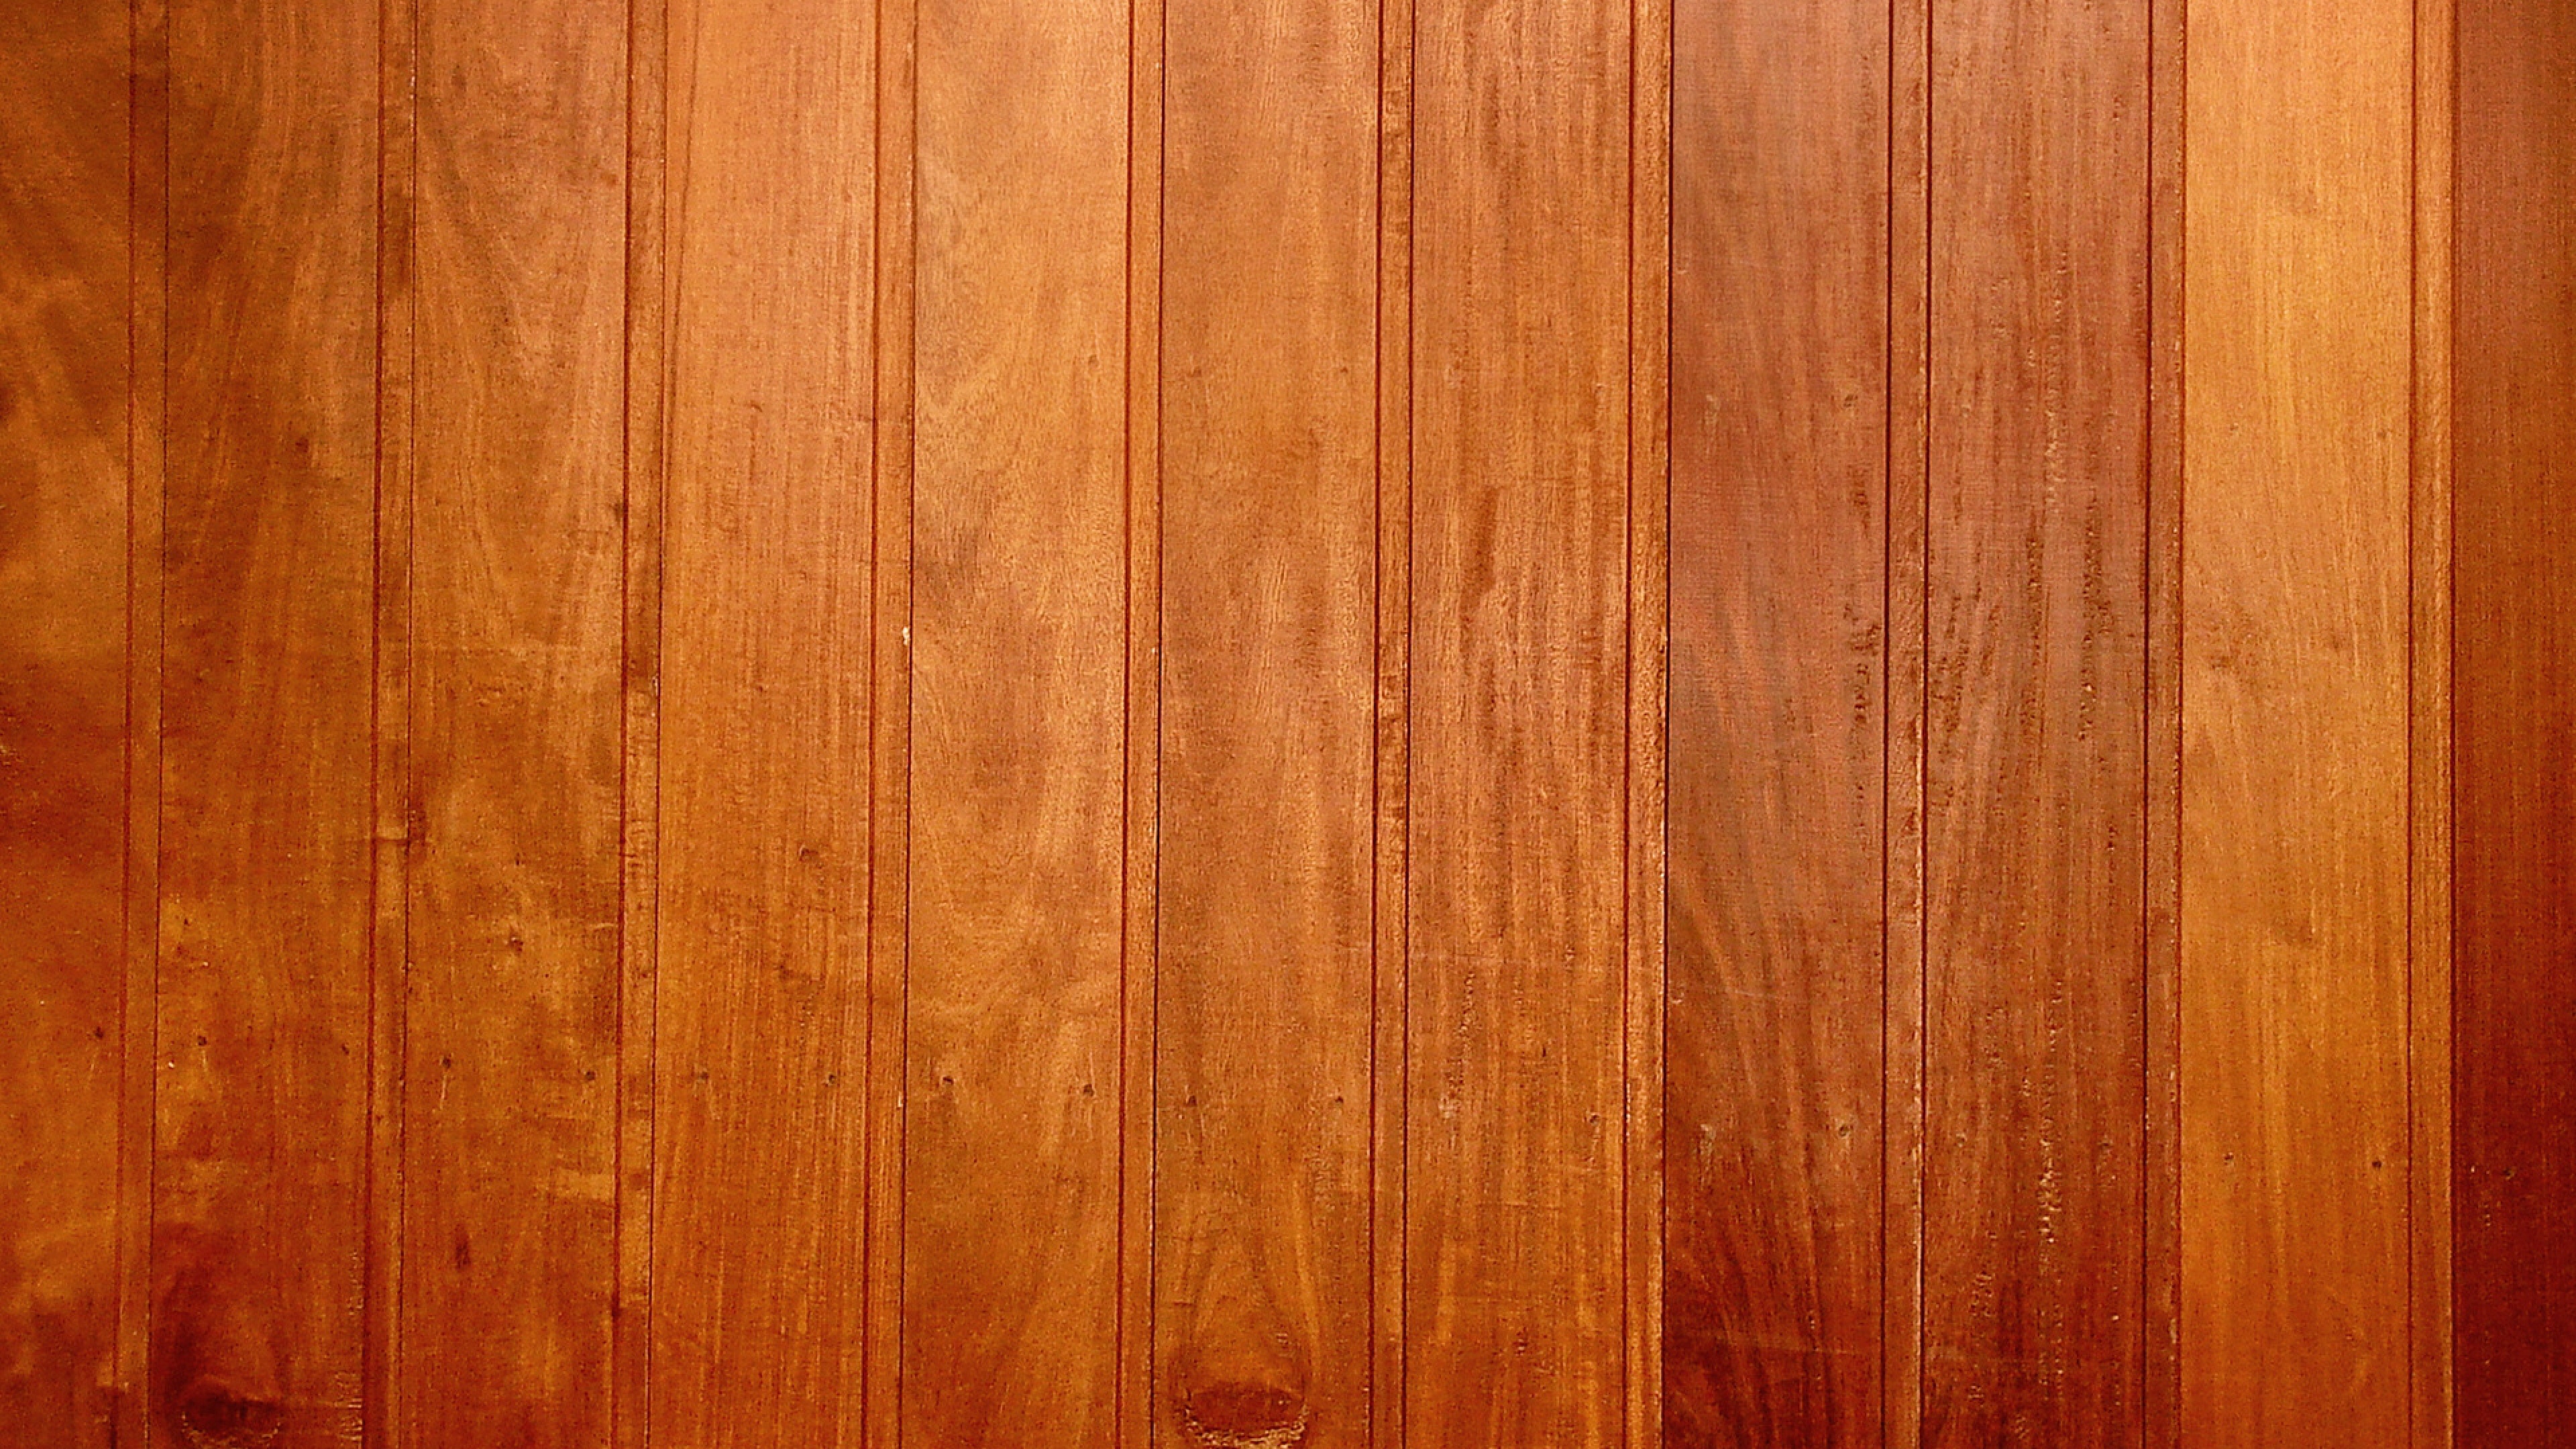 3840x2160 4k Wood Texture 4k Hd 4k Wallpapers Images Backgrounds ...